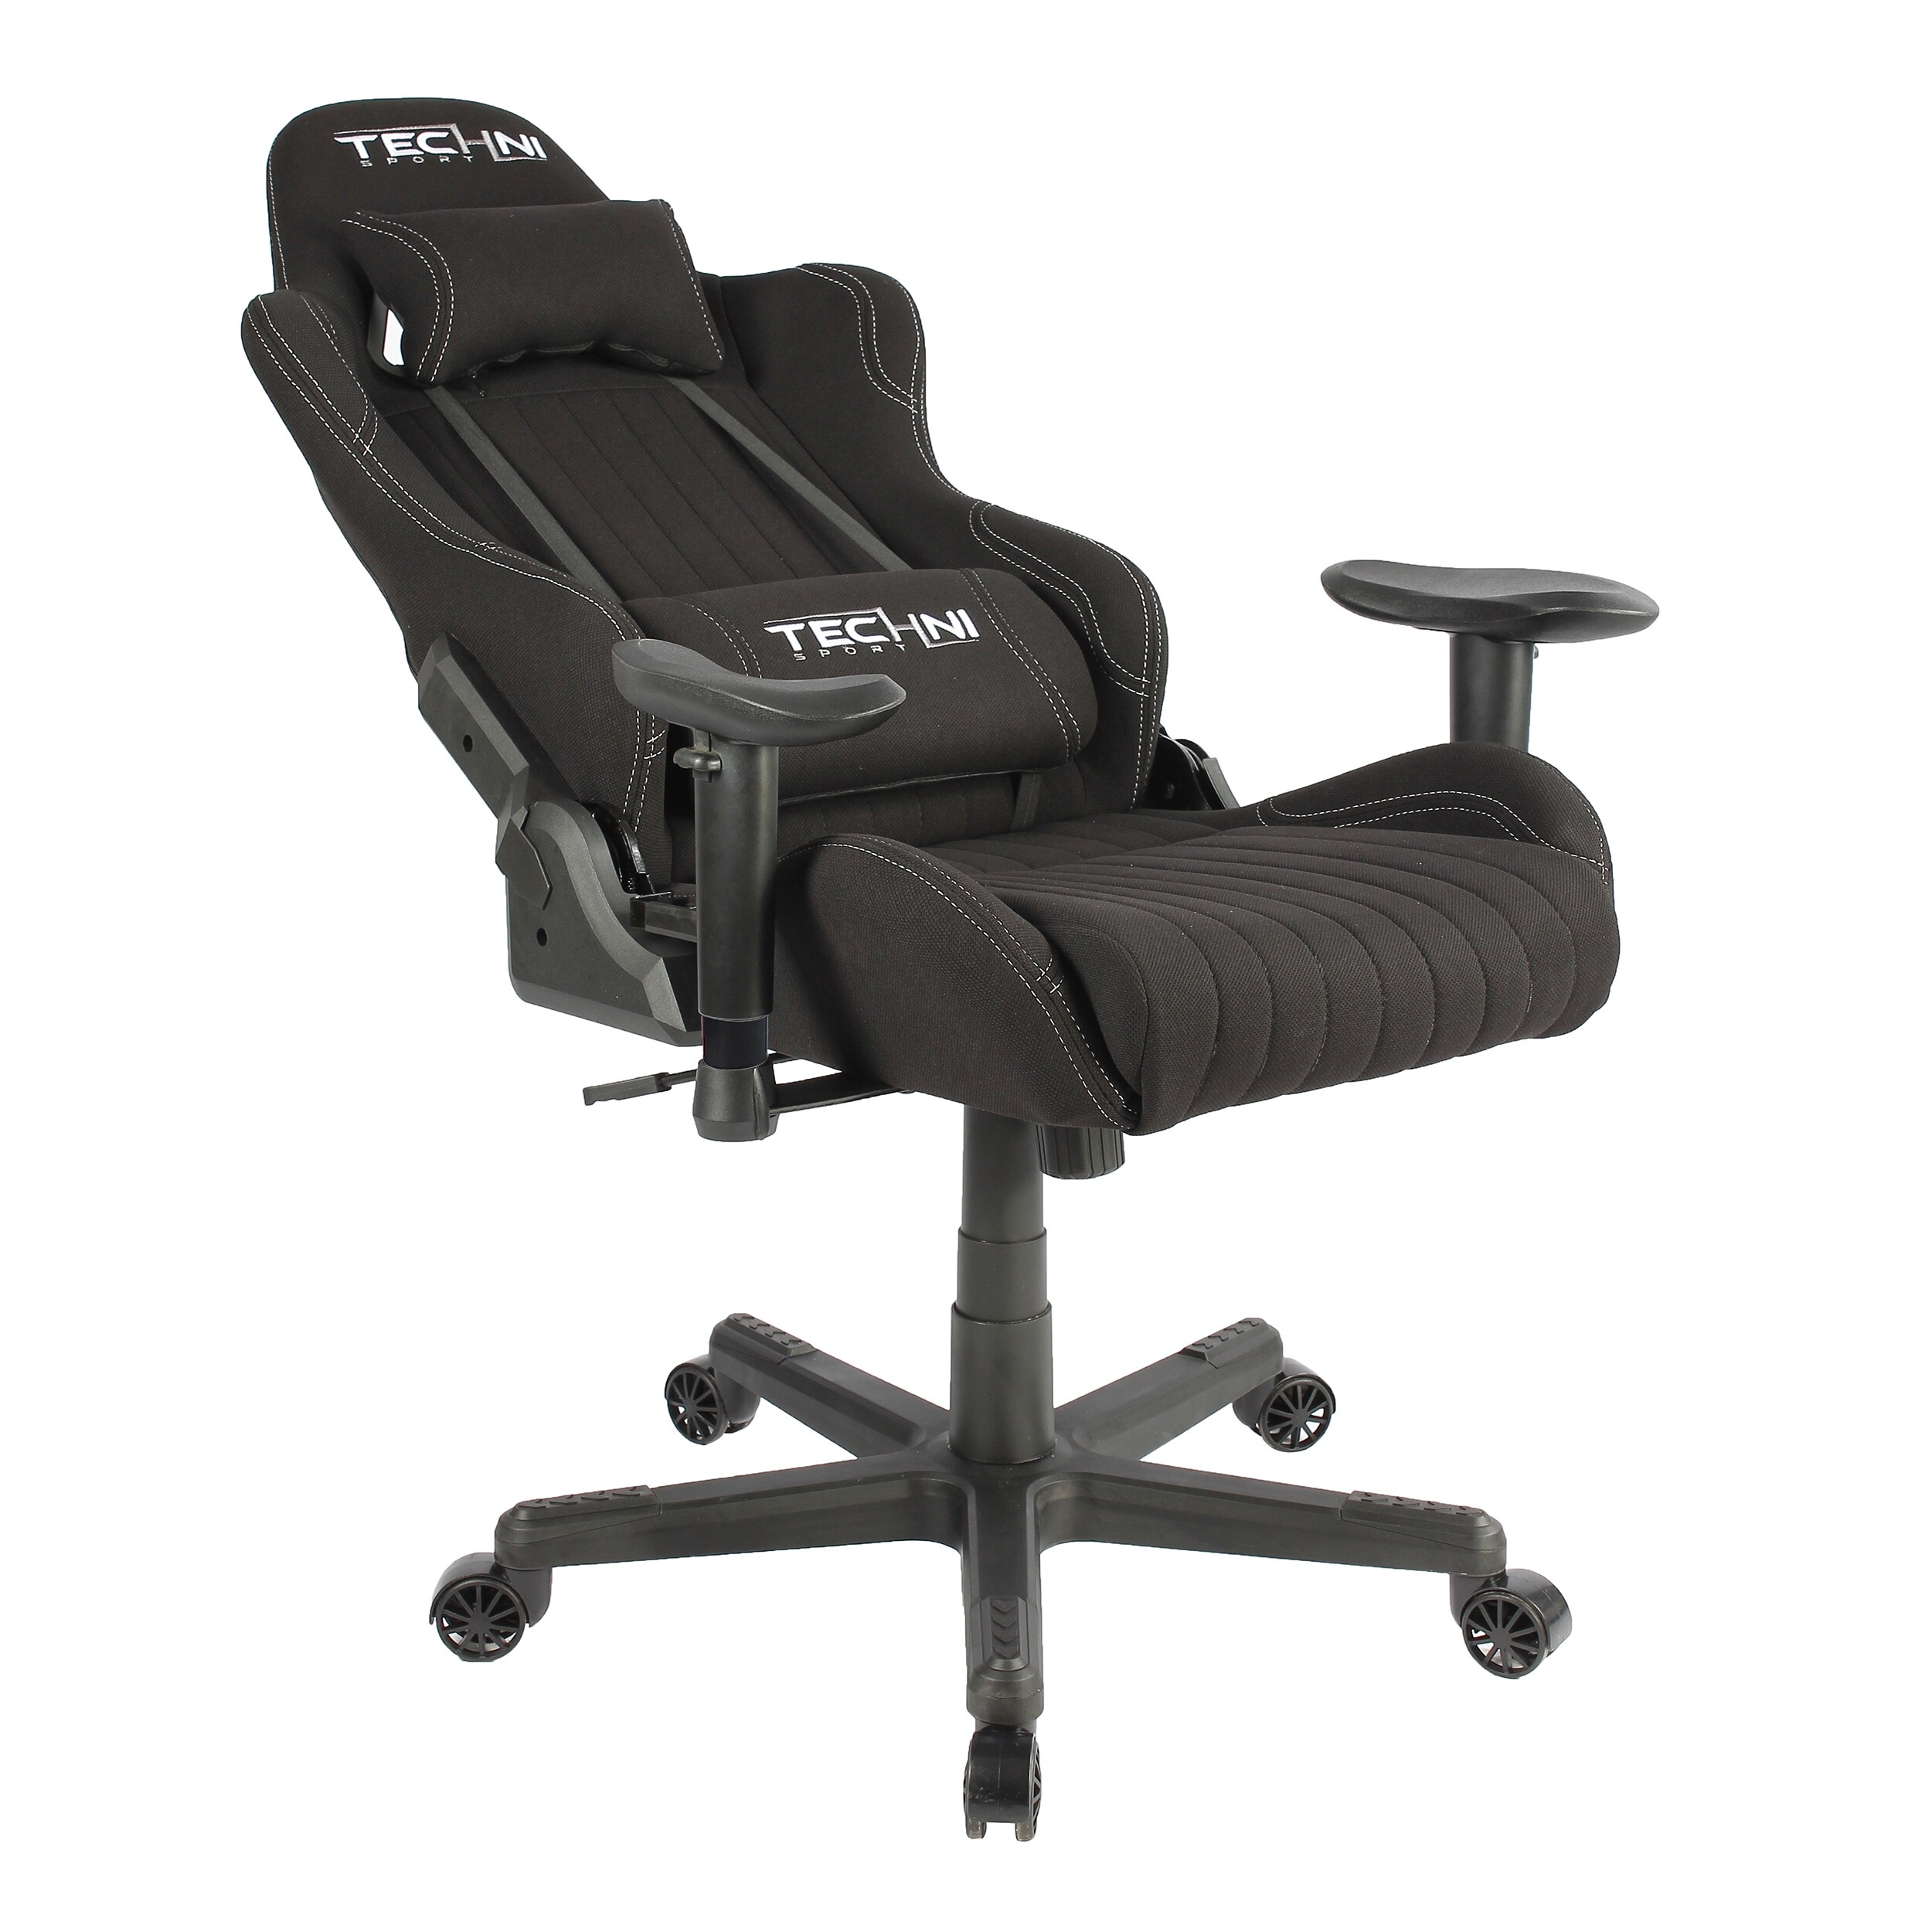 https://ak1.ostkcdn.com/images/products/is/images/direct/d2eccfd3d8677f99e1a6c3315f53f3216637da76/Ergonomic-High-Back-Racer-Style-Height-Adjustable-Gaming-Chair-with-Adjustable-Armrests-%0ANon-marking-Casters.jpg